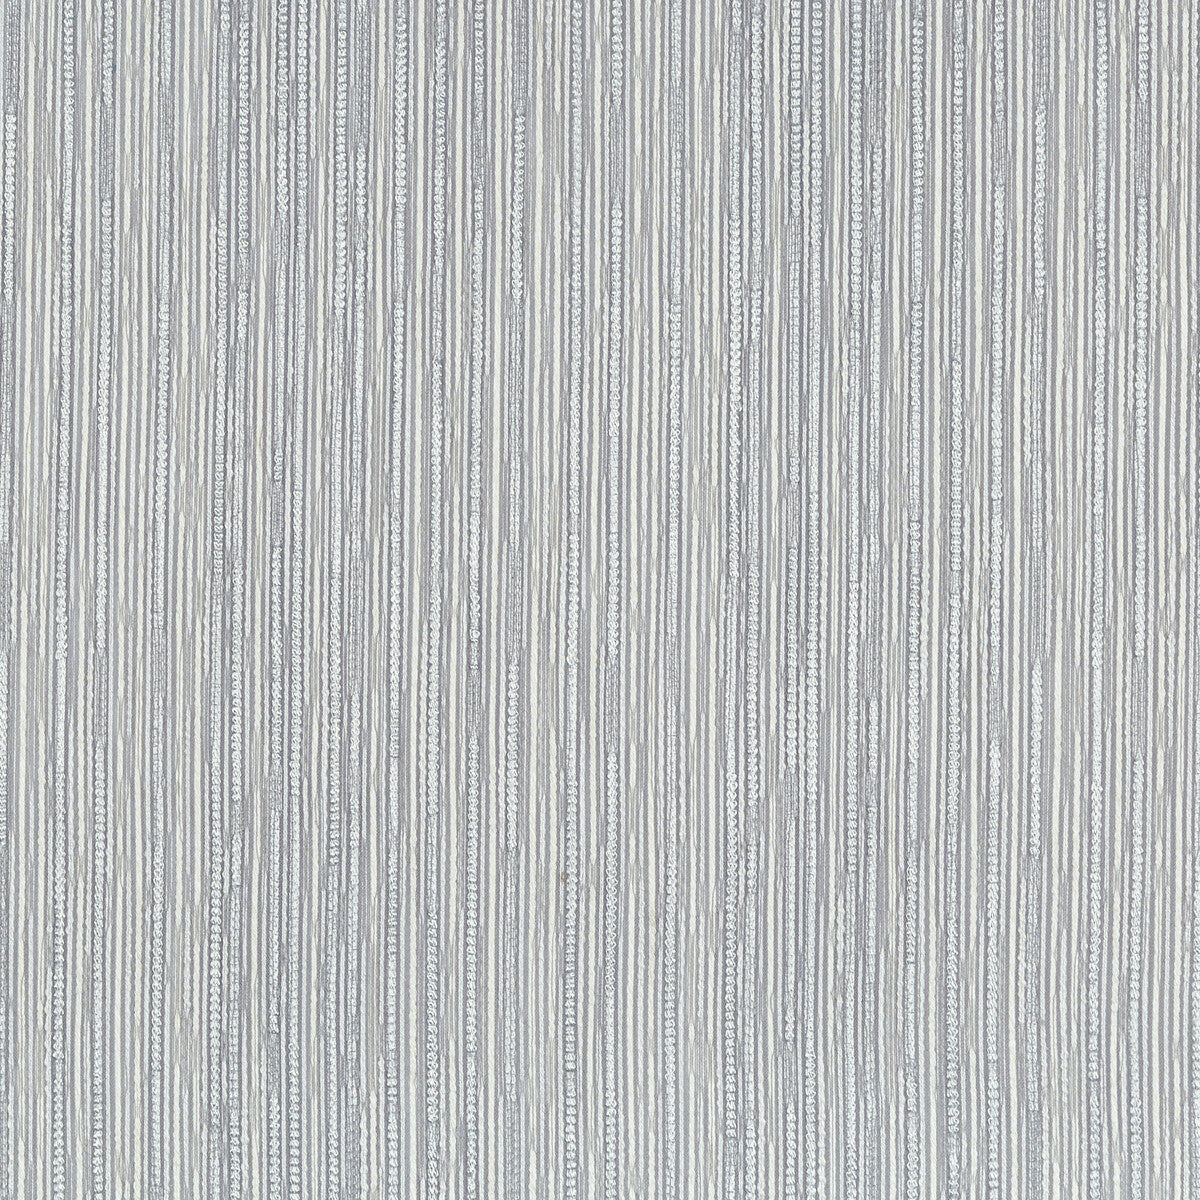 Drifting fabric in gray pearl color - pattern 4782.11.0 - by Kravet Contract in the Kravet Cruise collection